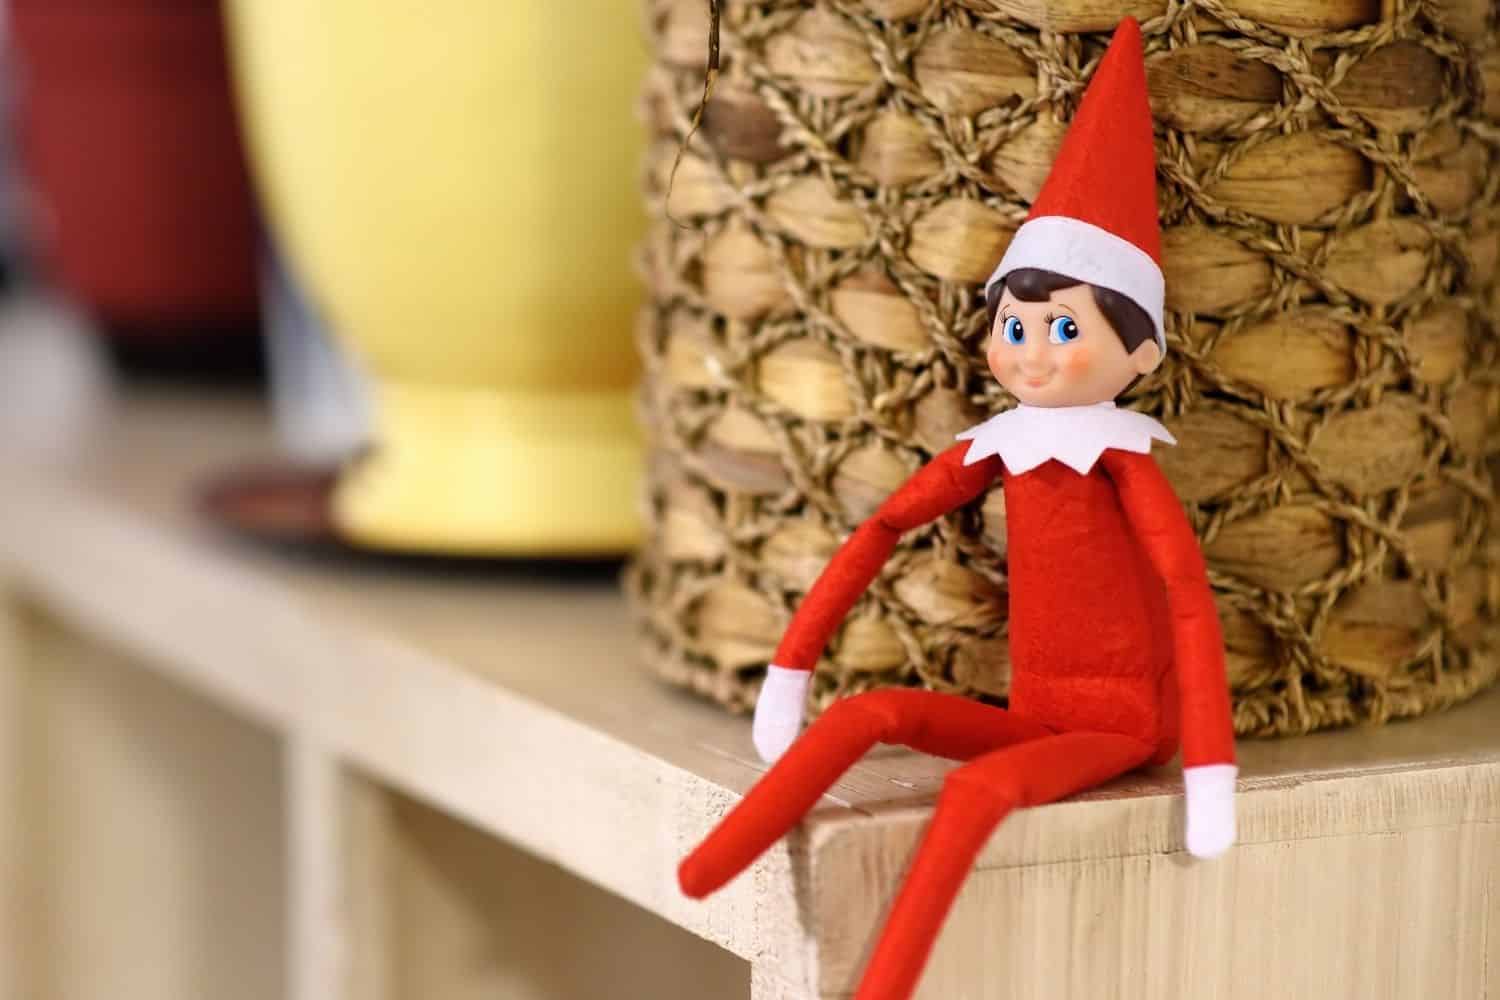 Elf on the Shelf waiting for his name